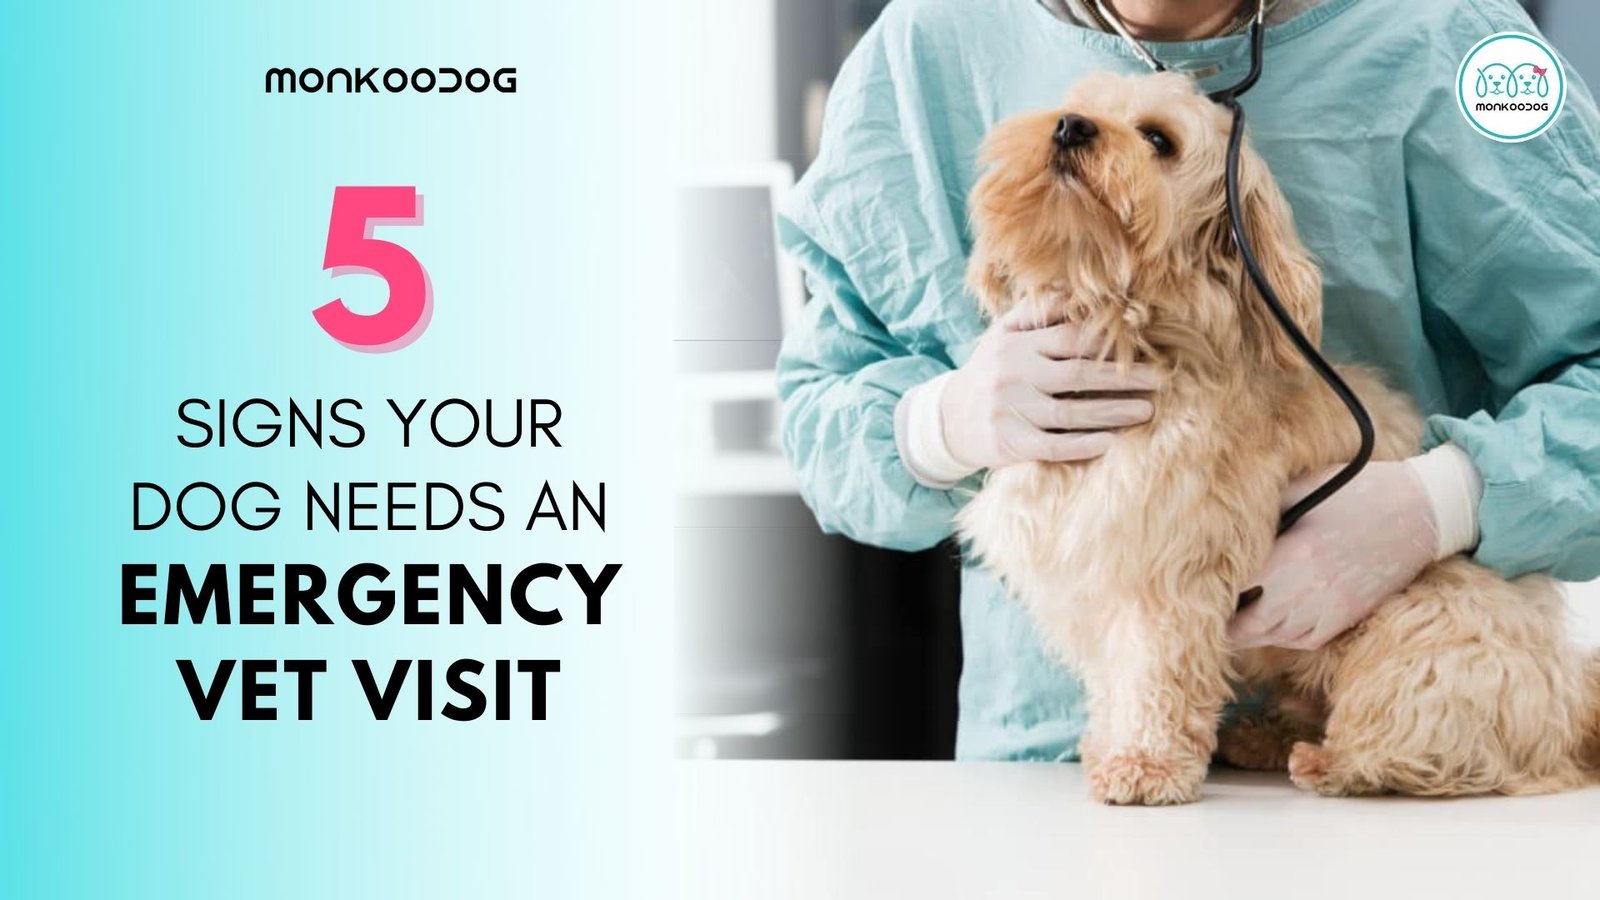 5 signs your dog needs an emergency visit